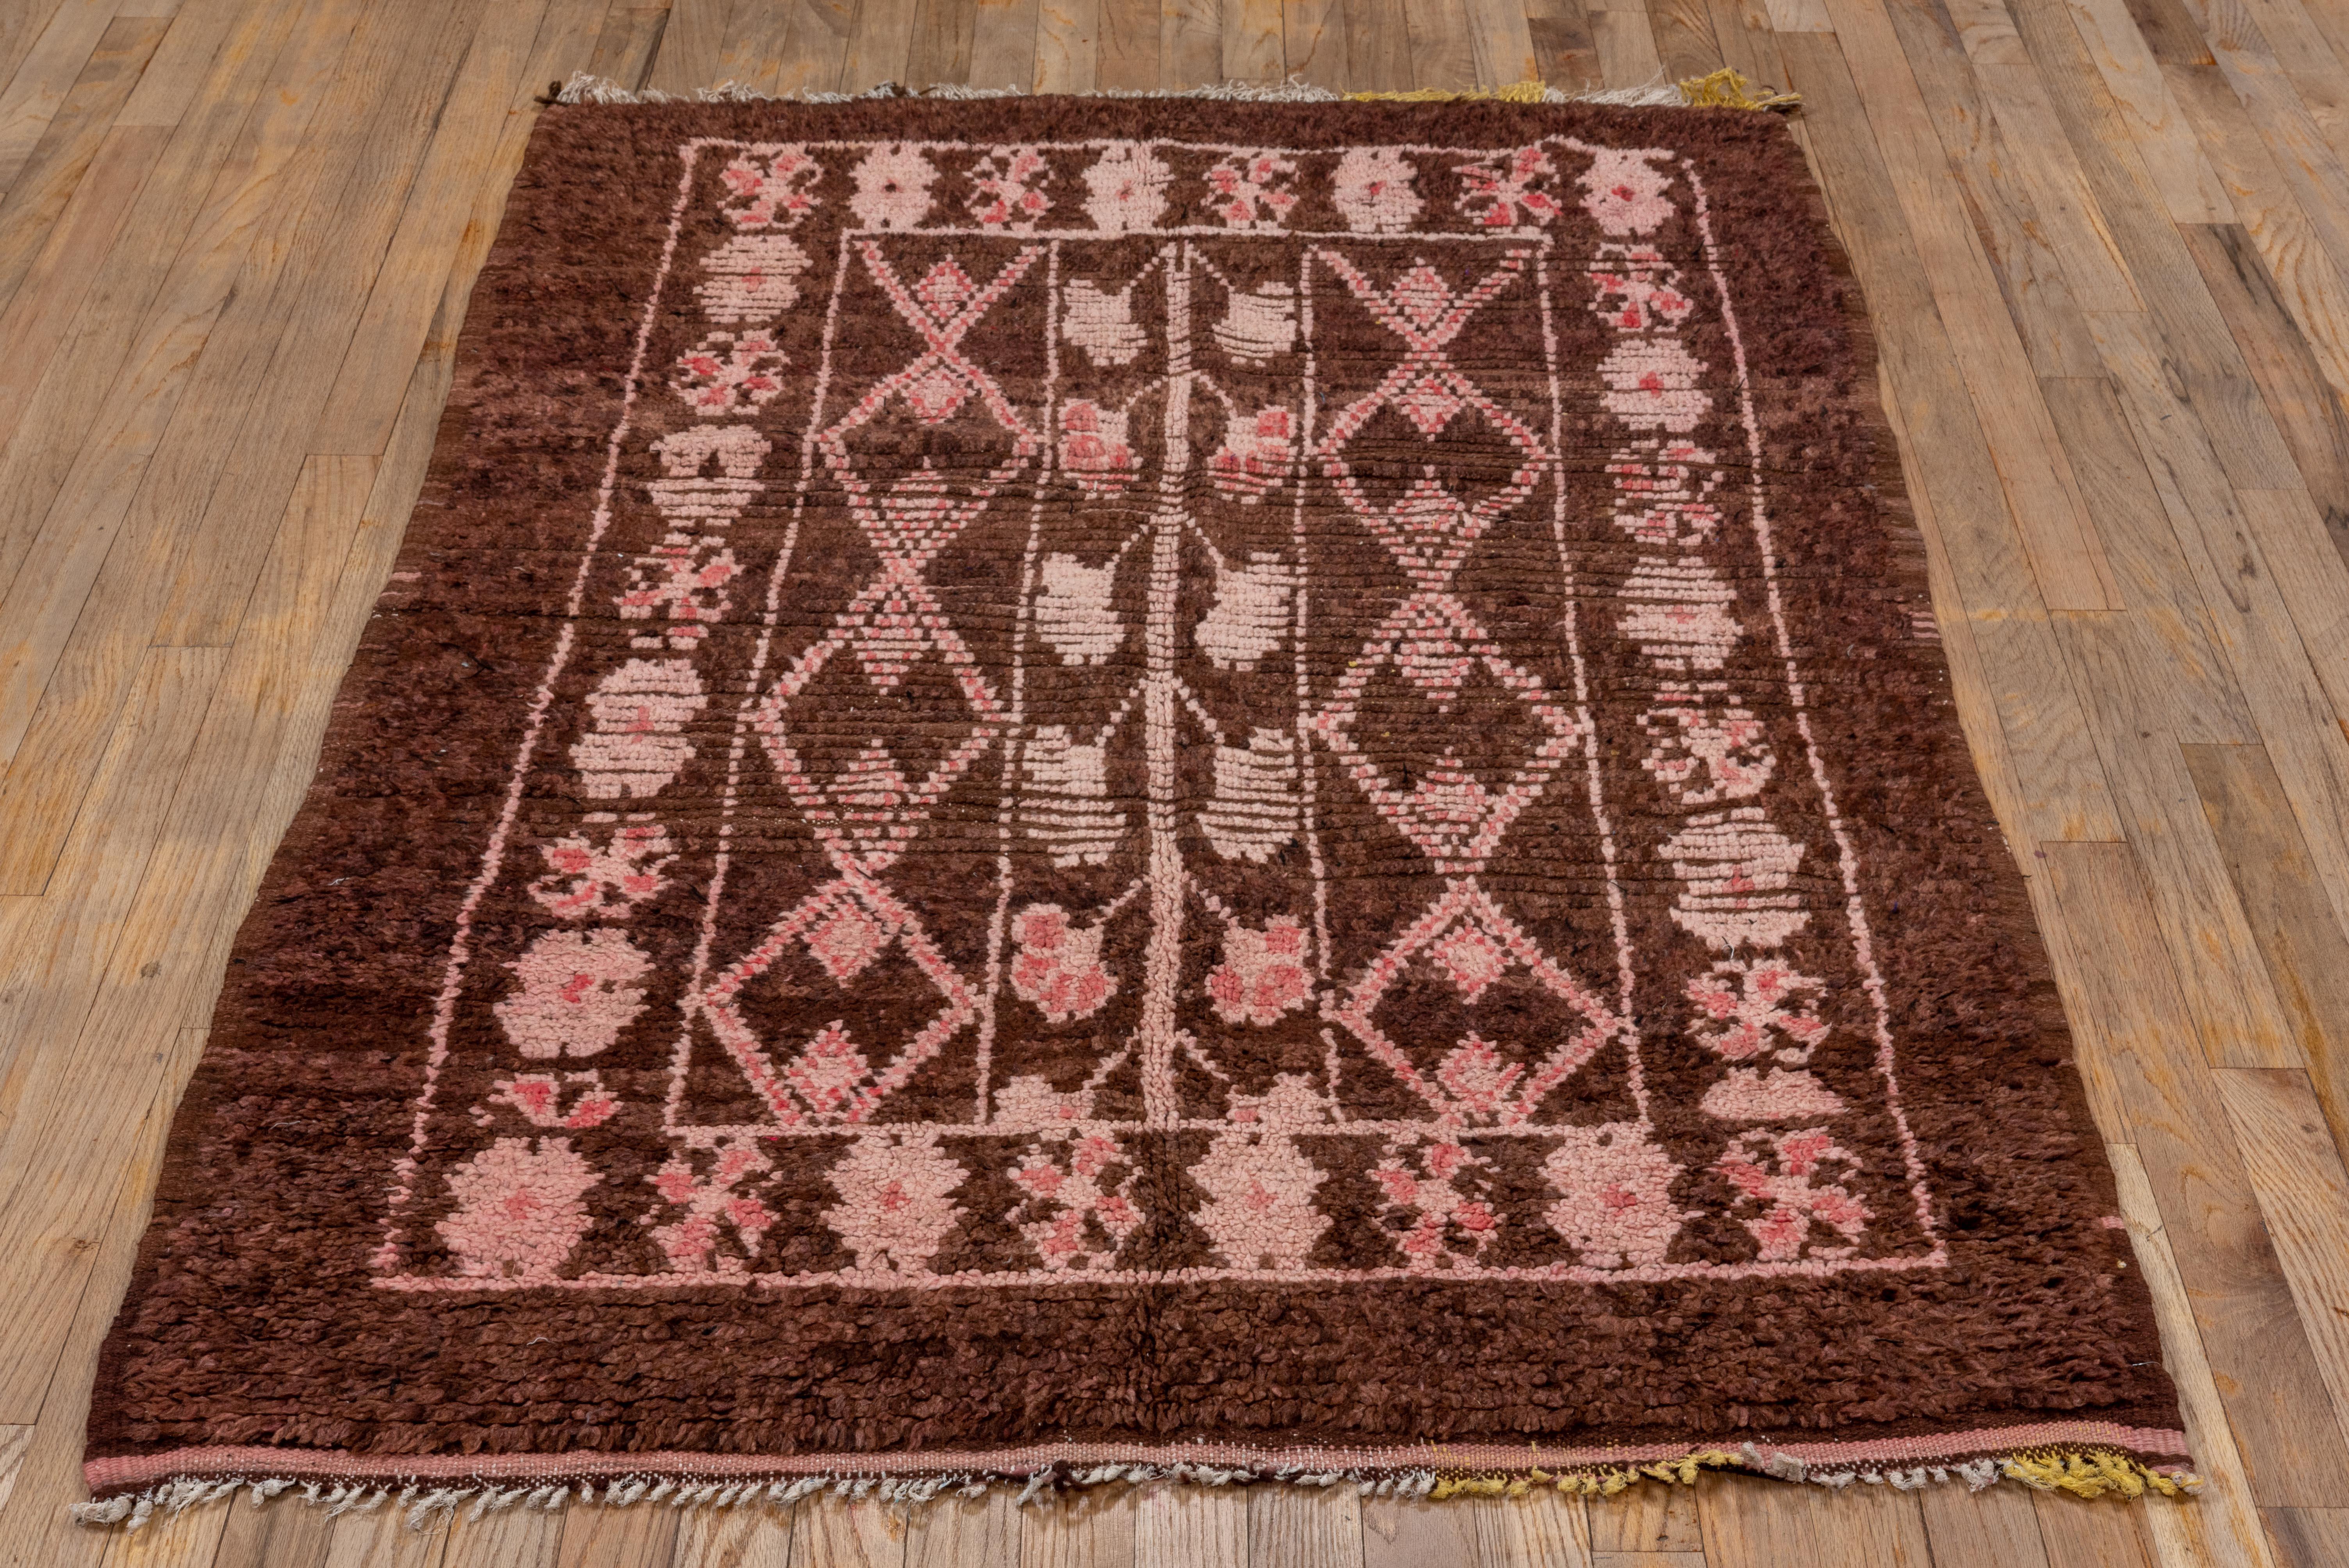 Traditional village rug made in Morocco, likely by a notable Tribal group. Pattern is designed without an outline and made entirely from memory.